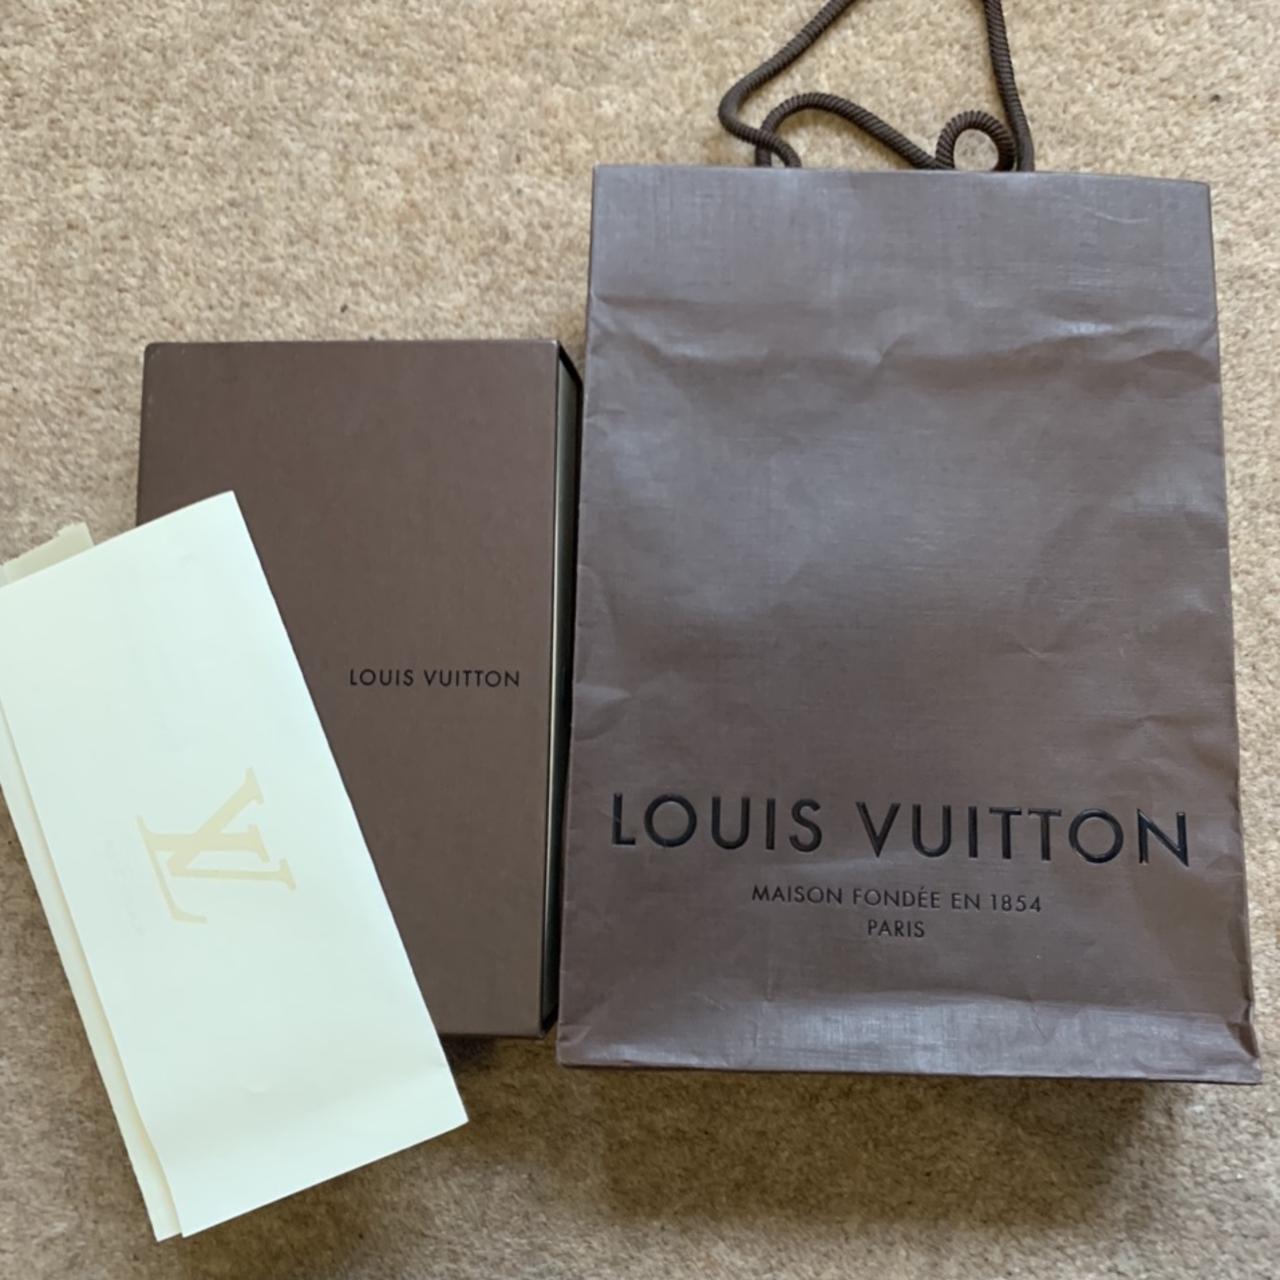 the brown paper bag louis vuittons